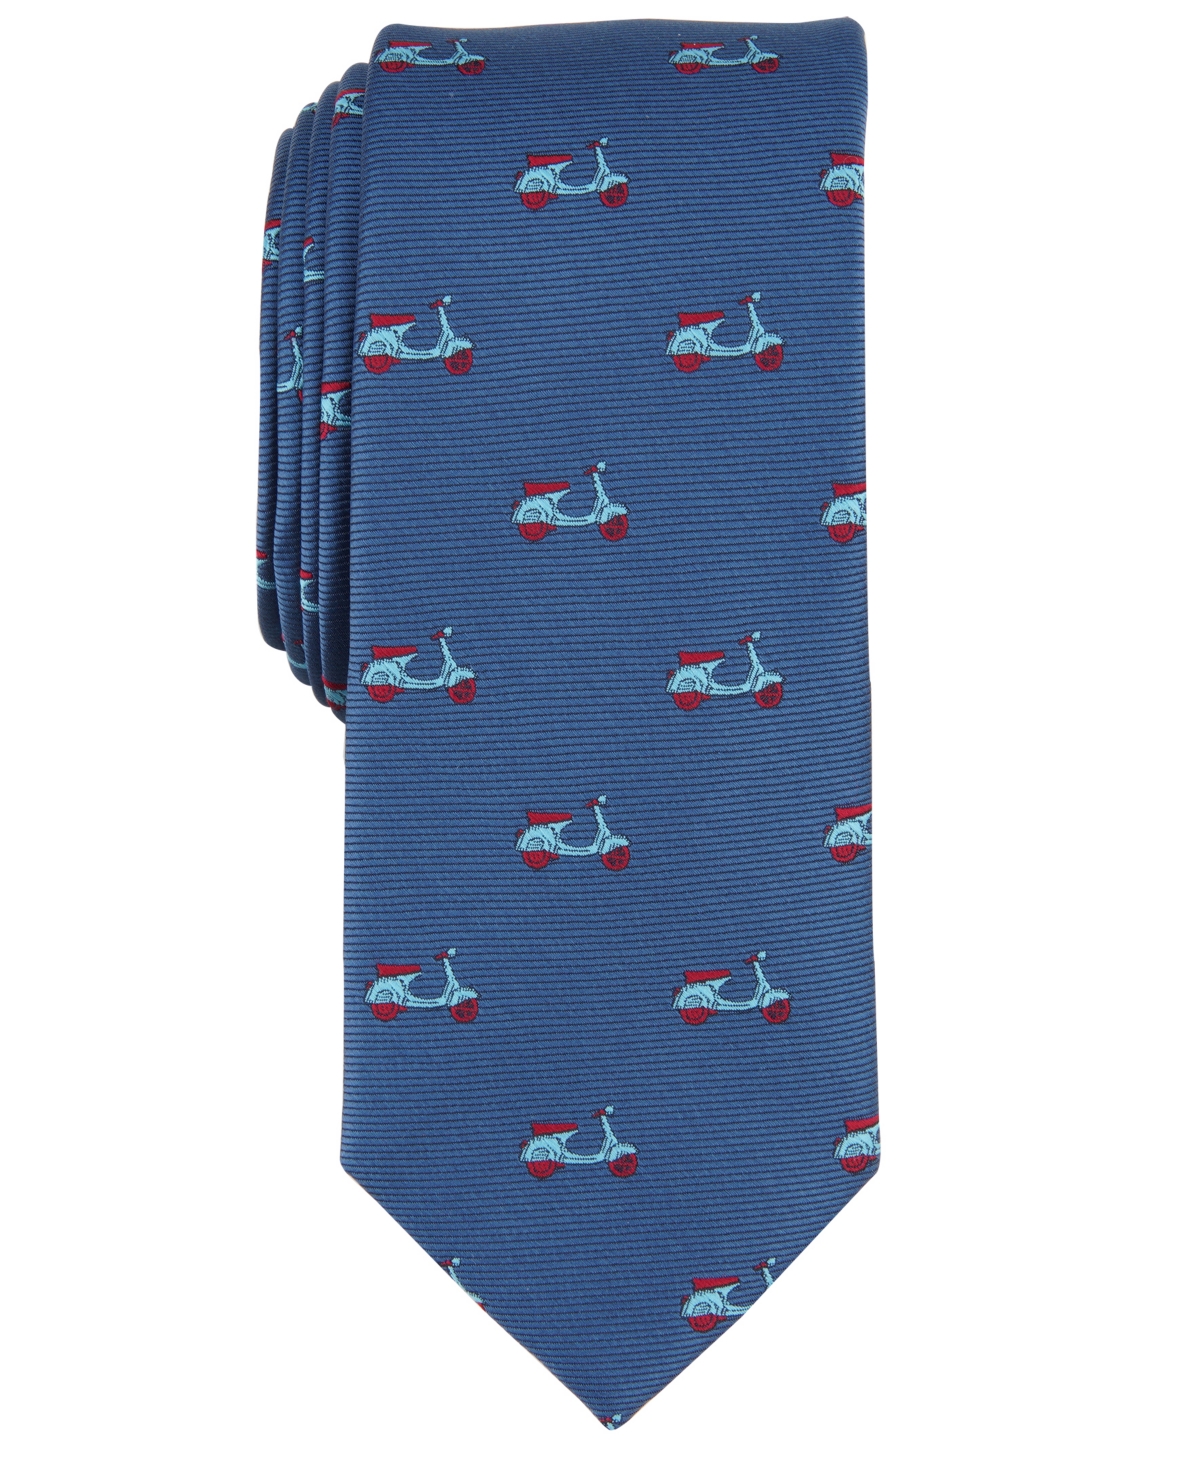 Men's Scooter Tie, Created for Macy's - Blue